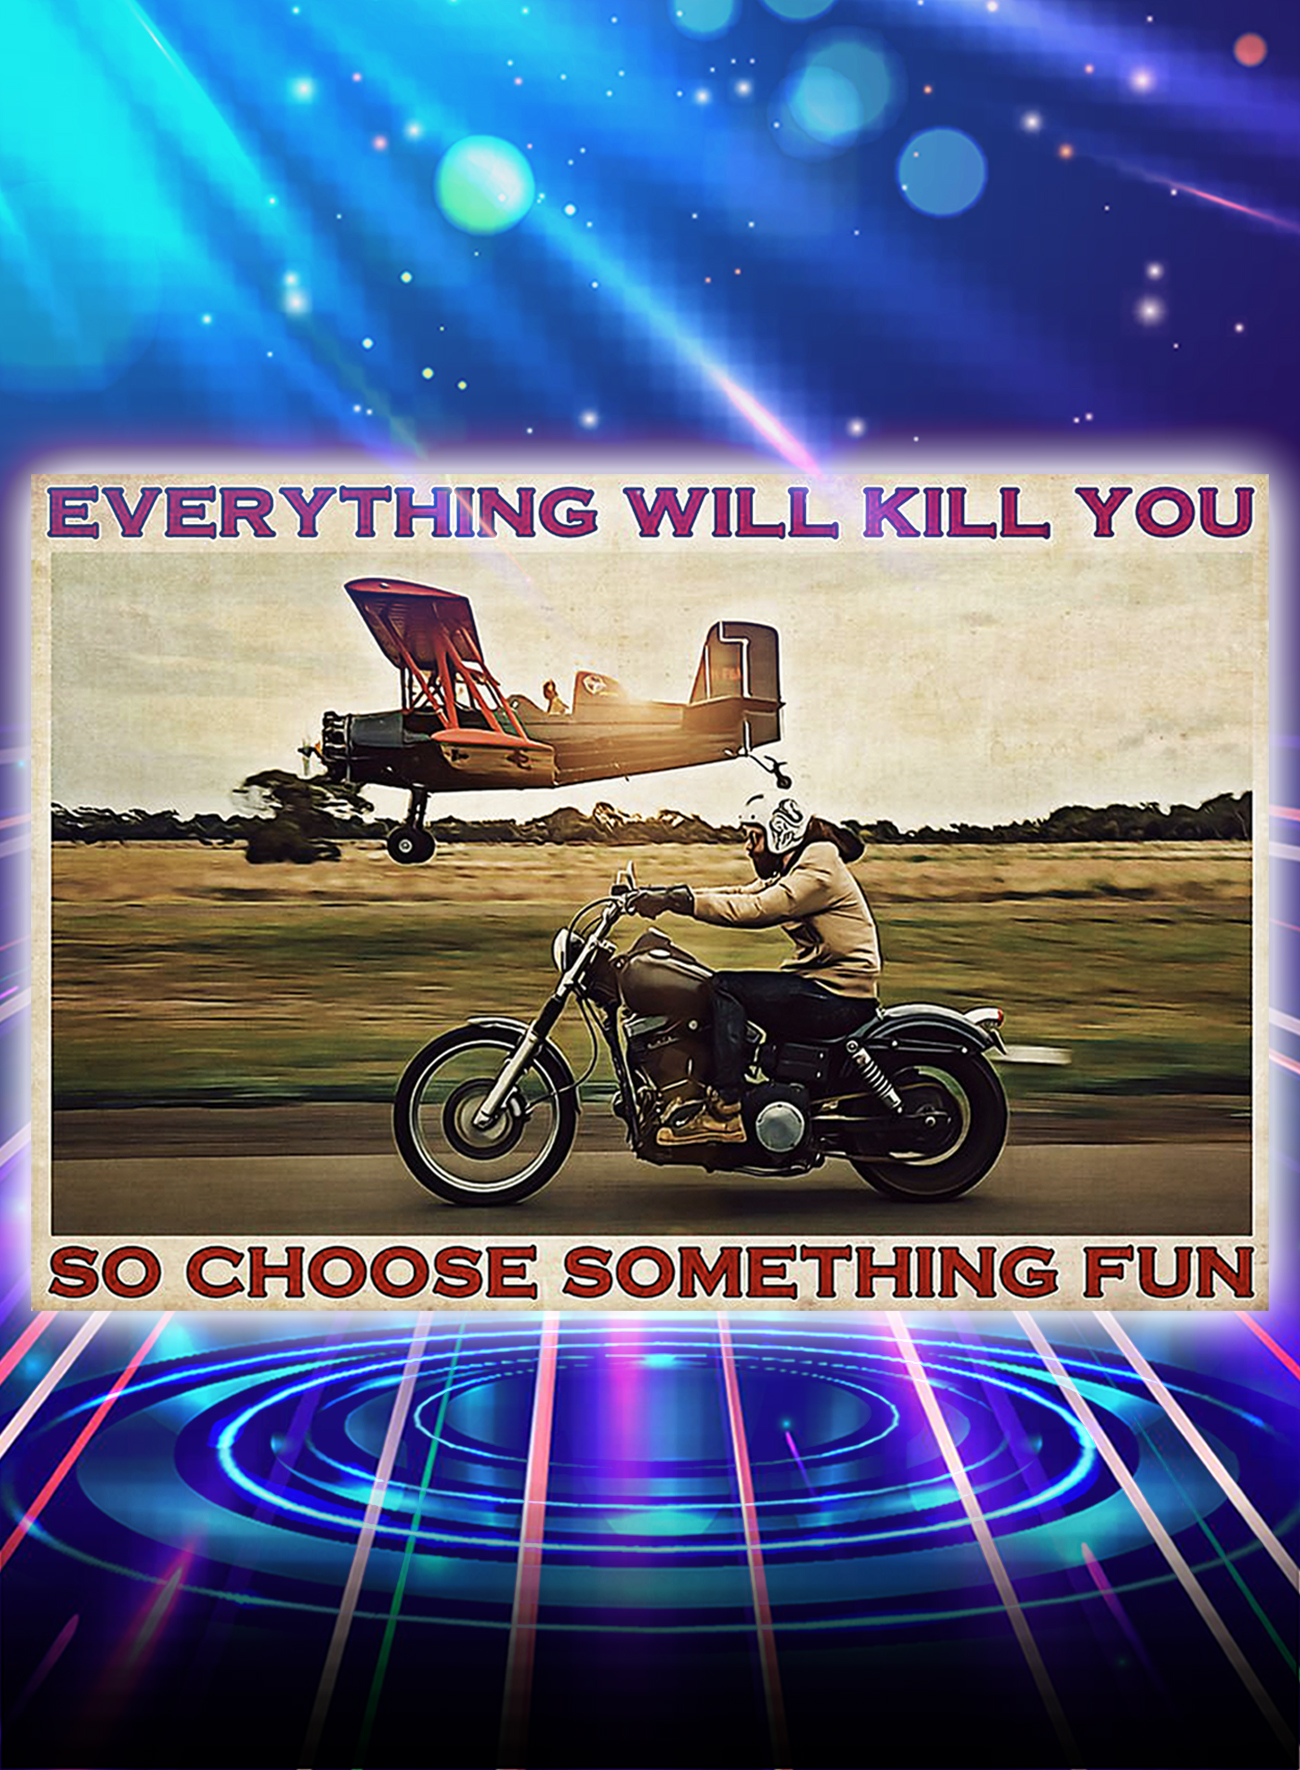 Motorbike planes everything will kill you so choose something fun poster - A1